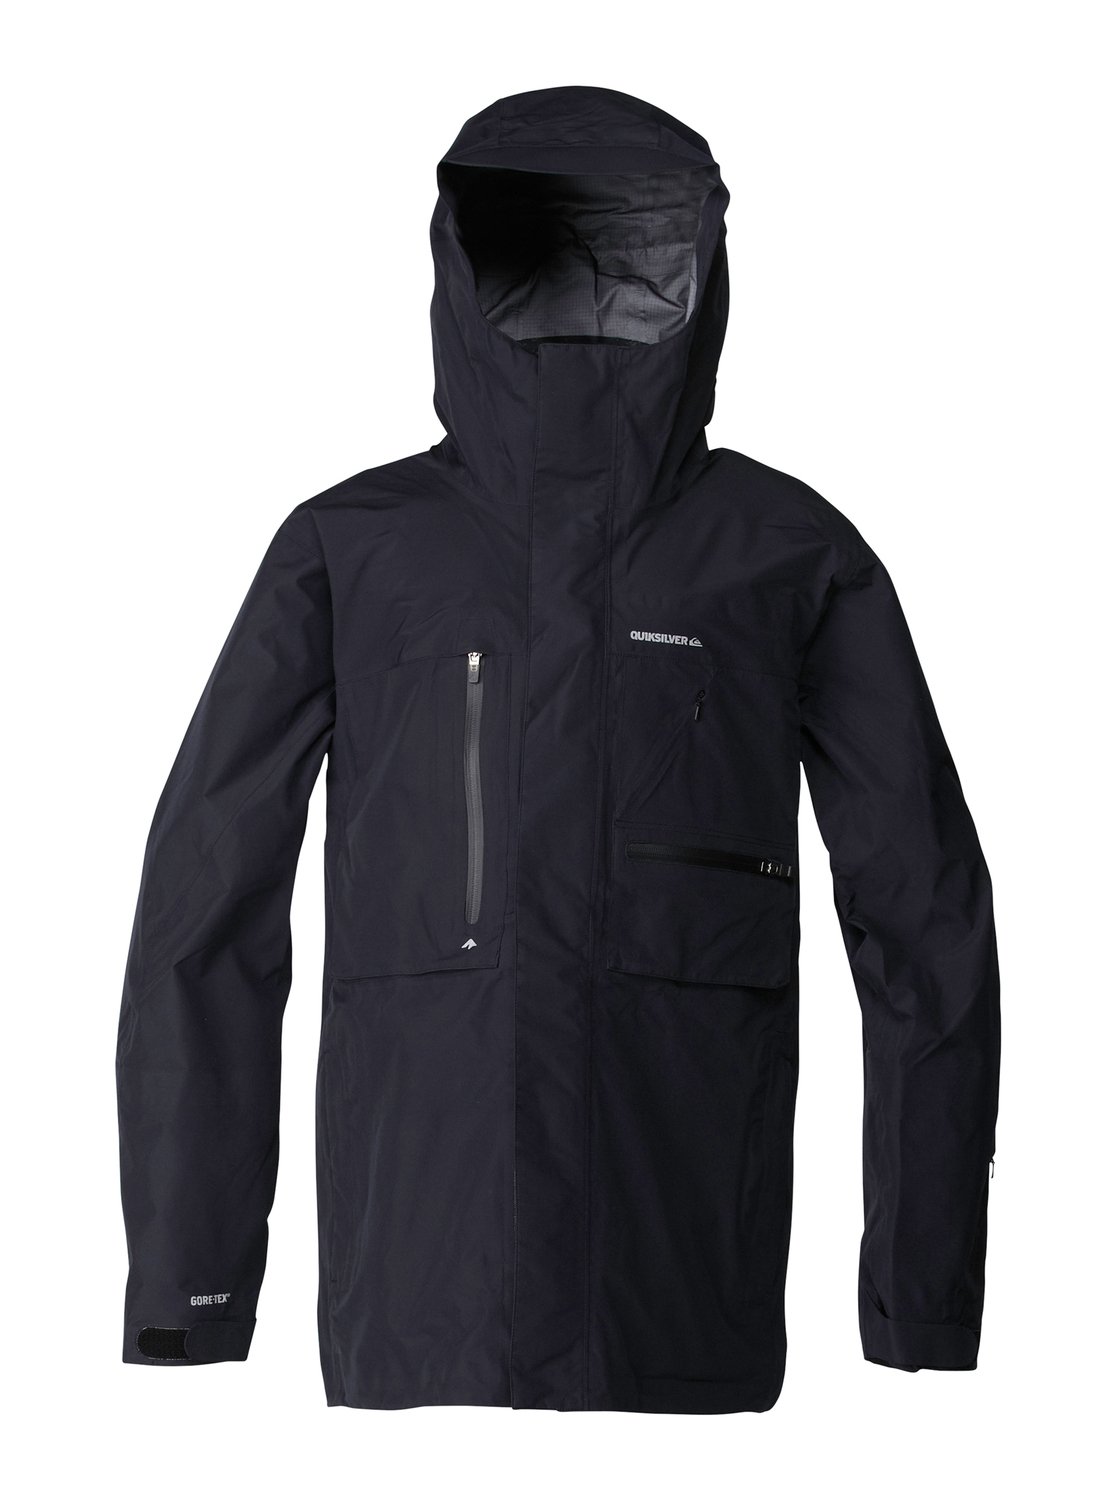 Over And Out Gore-Tex Pro Shell Jacket AQYTJ00007 | Quiksilver